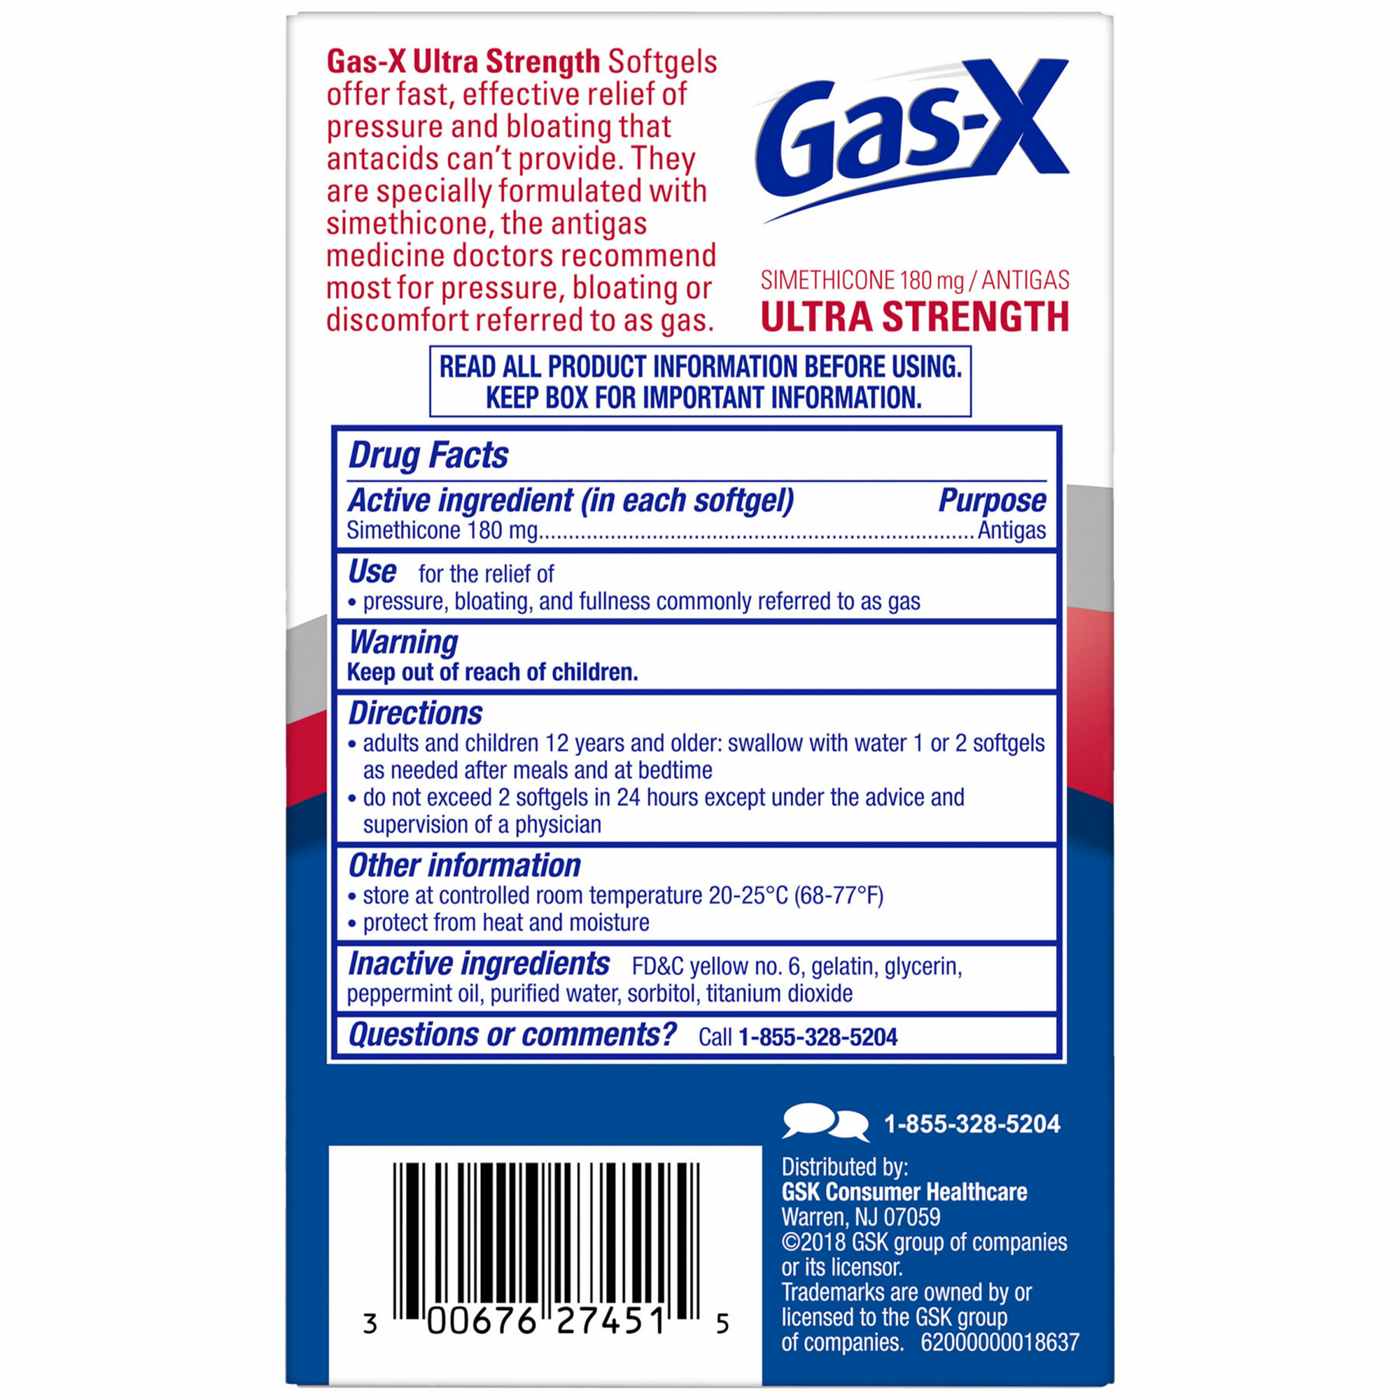 Gas-X Ultra Strength Softgels; image 4 of 9